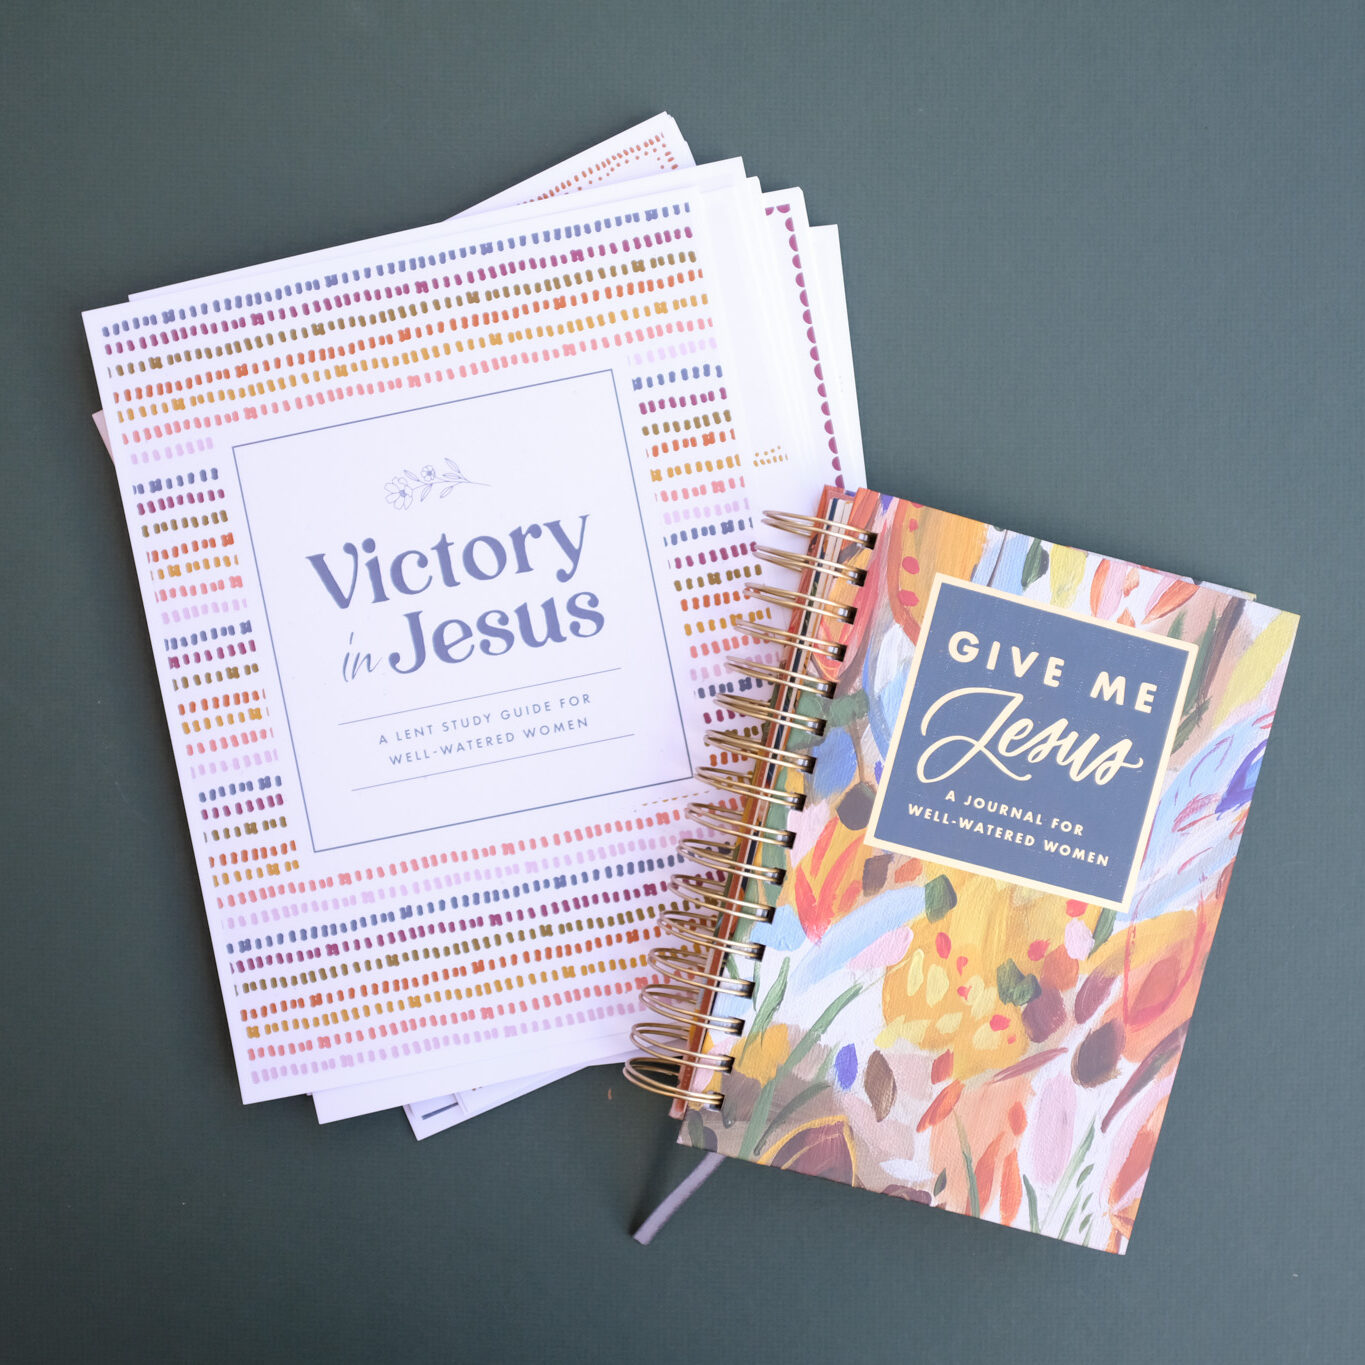 Introducing Victory in Jesus - A Lent Study Guide - an article from Well-Watered Women